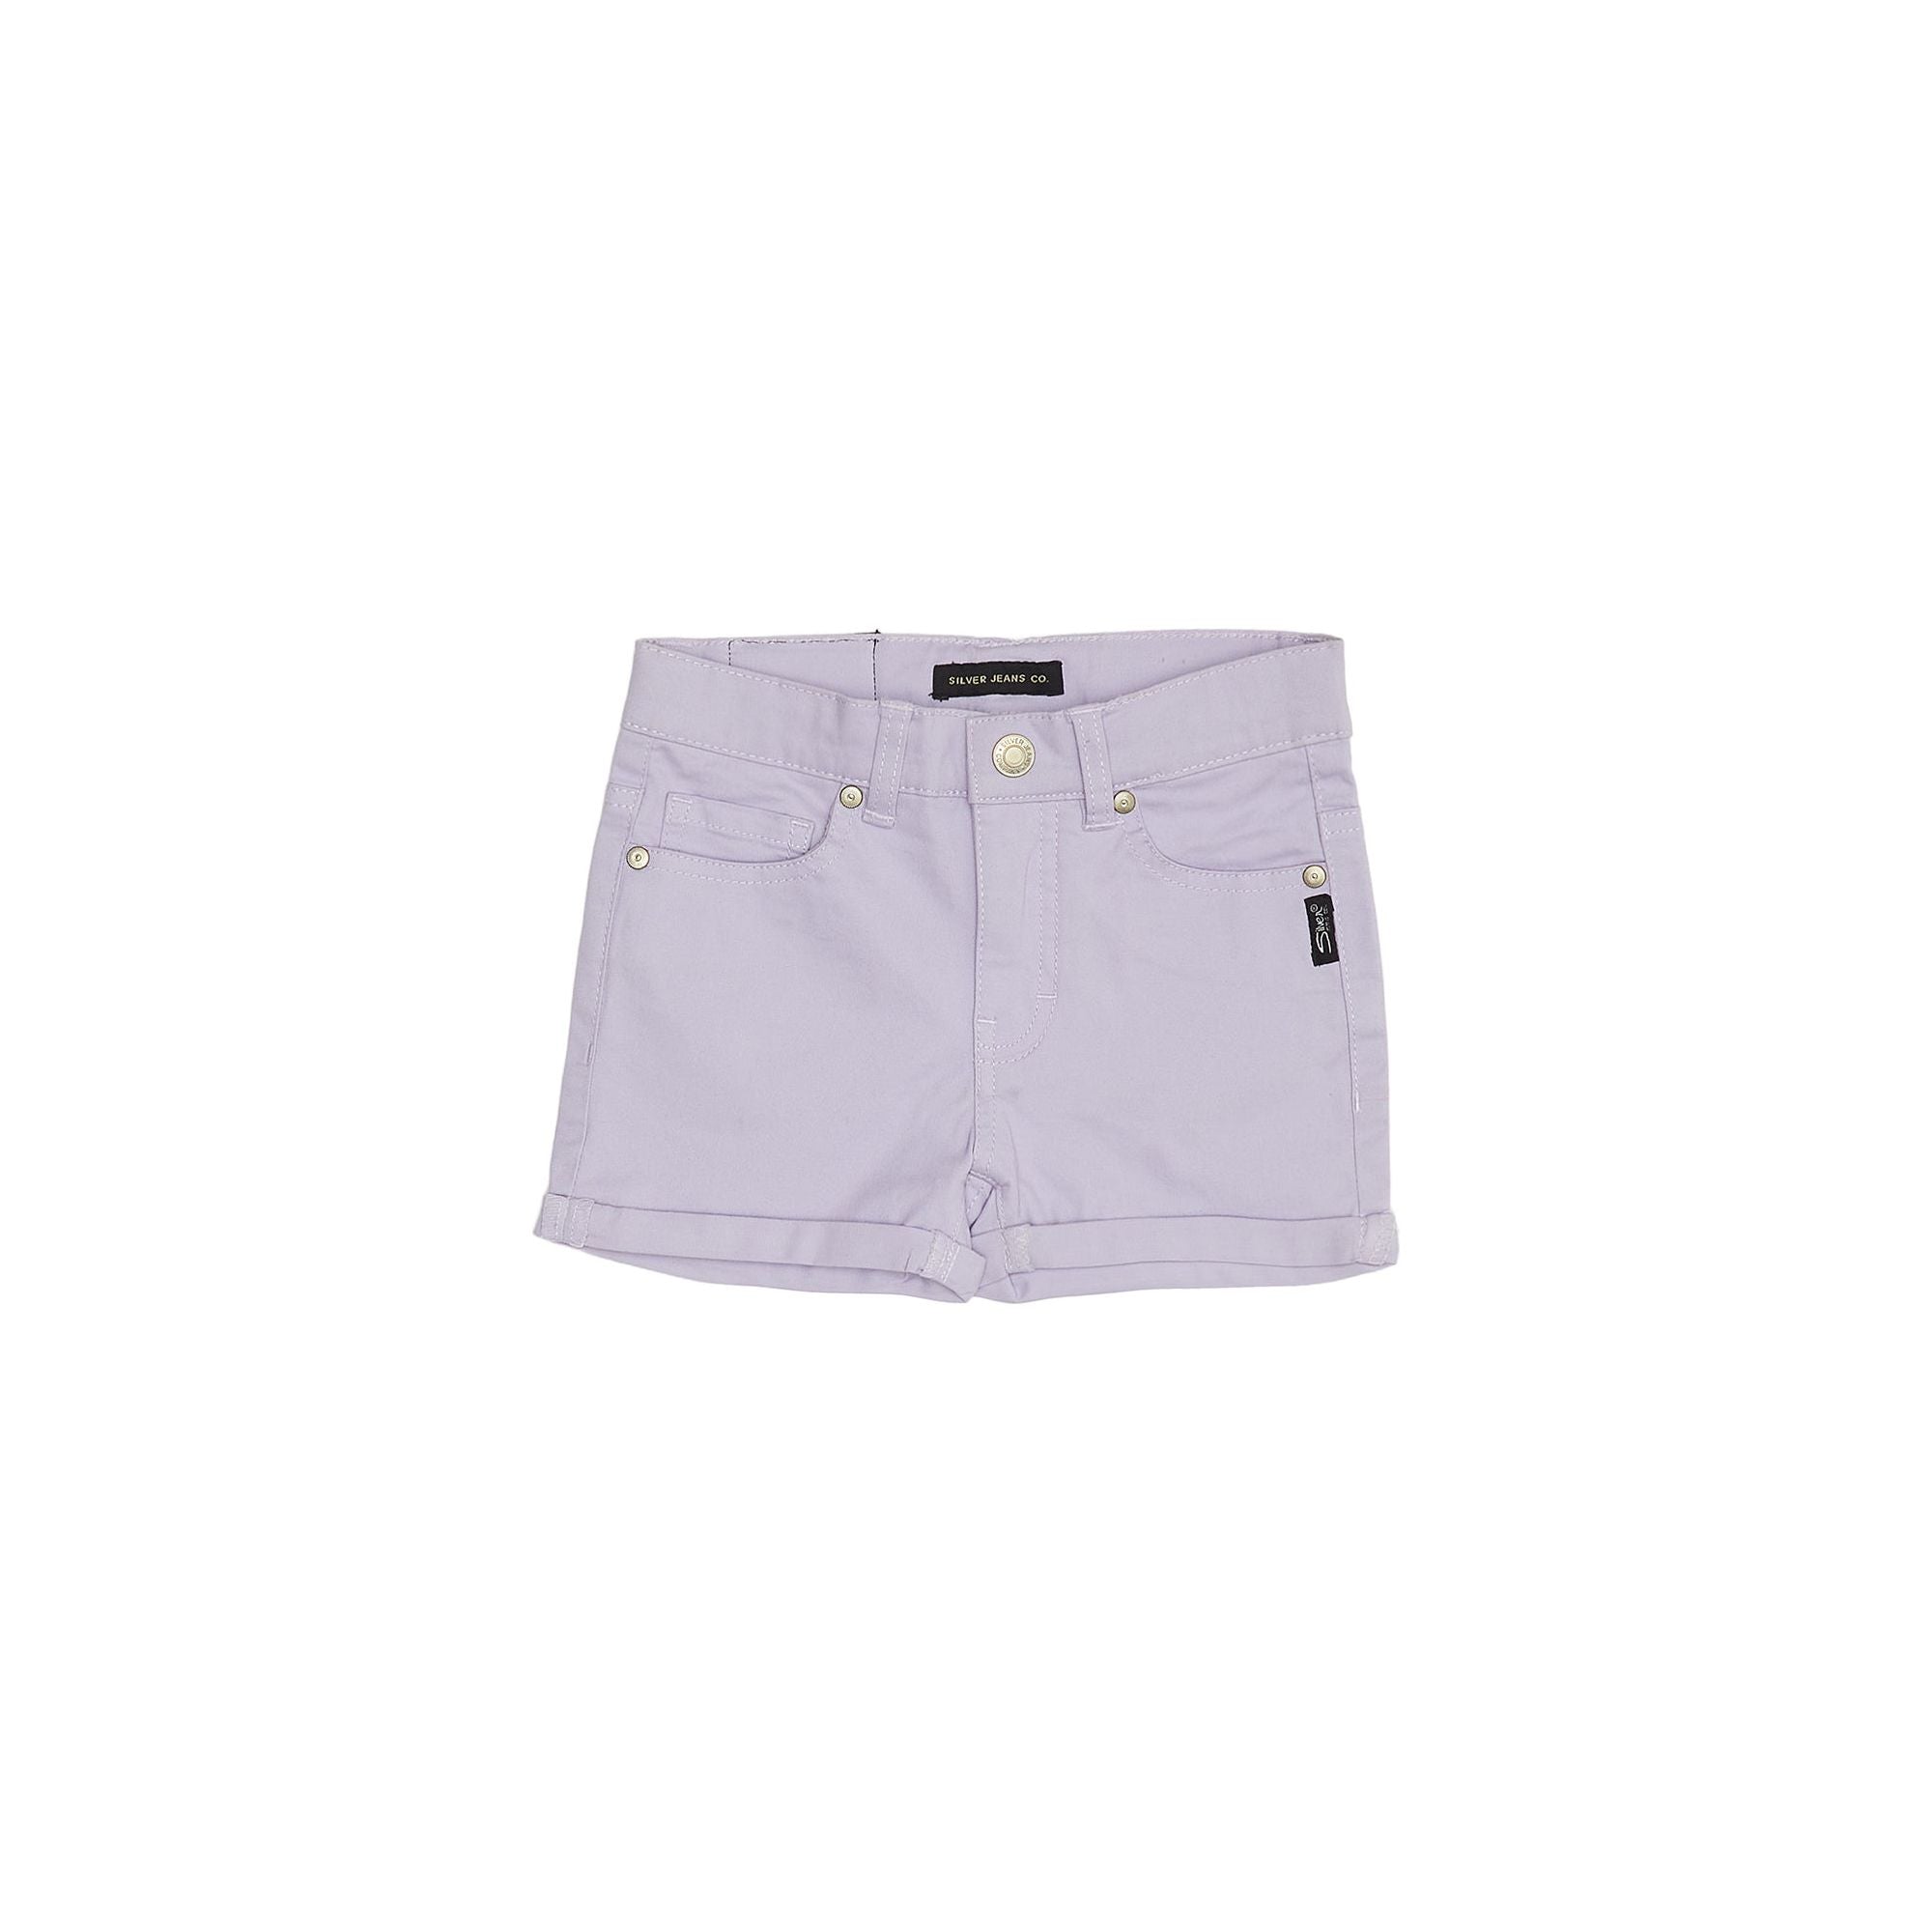 Silver Jeans - Girls Shorts in Lavender